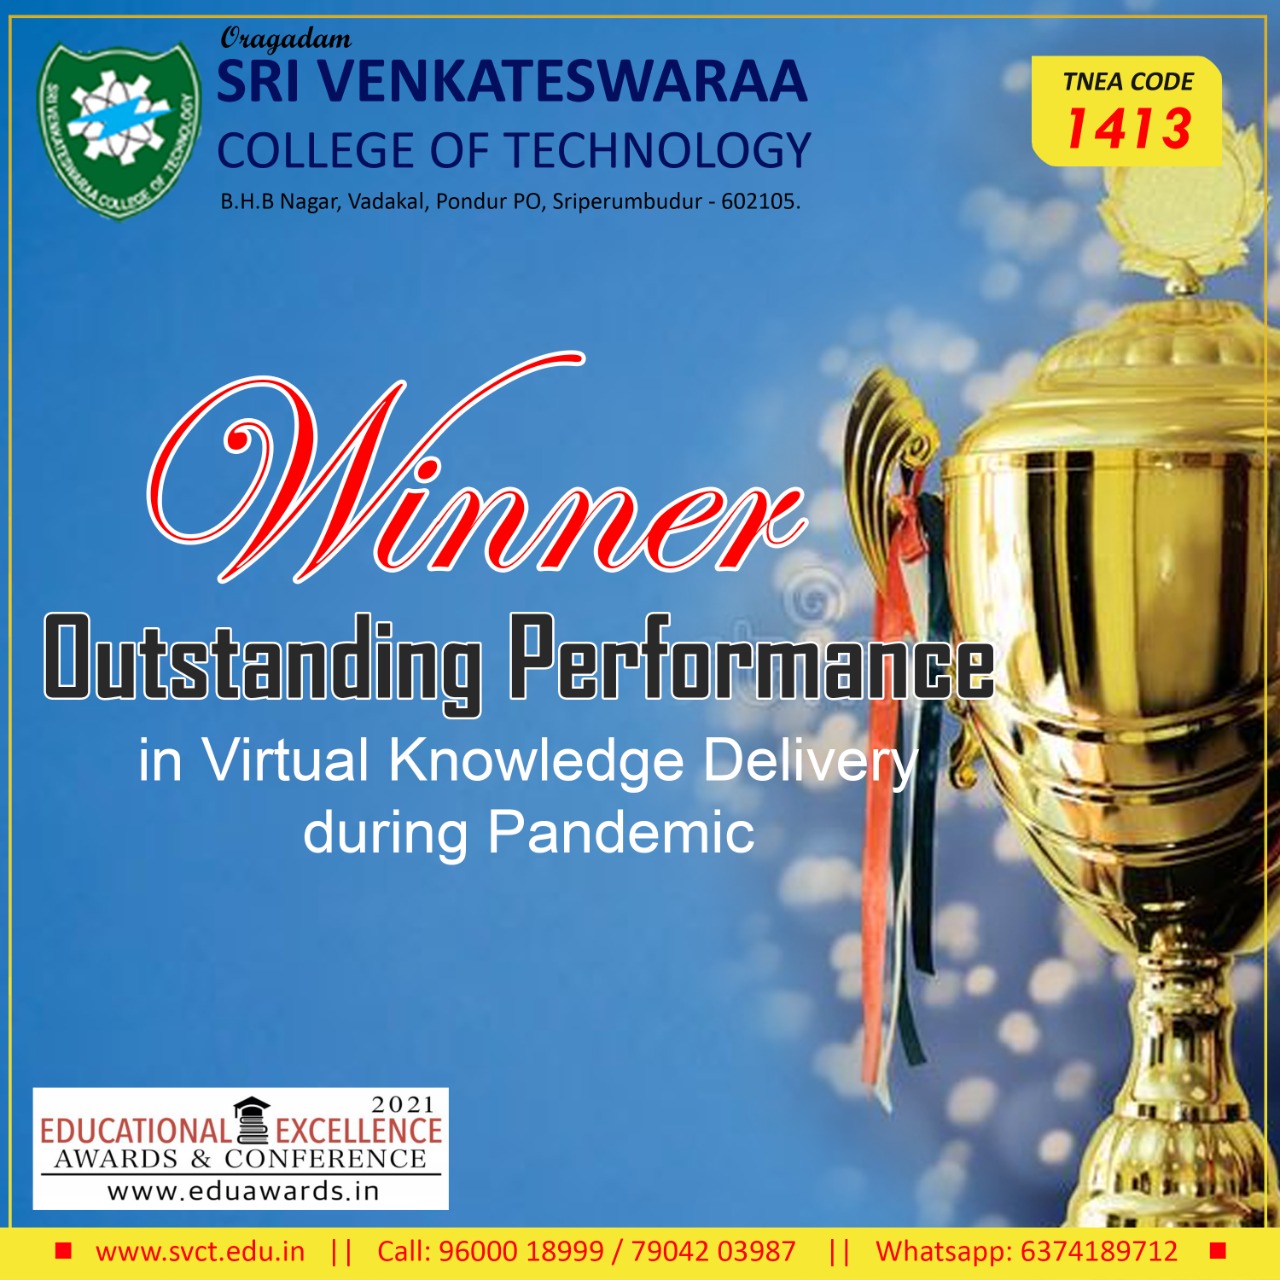 OUTSTANDING PERFORMANCE IN VIRTUAL KNOWLEDGE DELIVERY DURING PANDEMIC